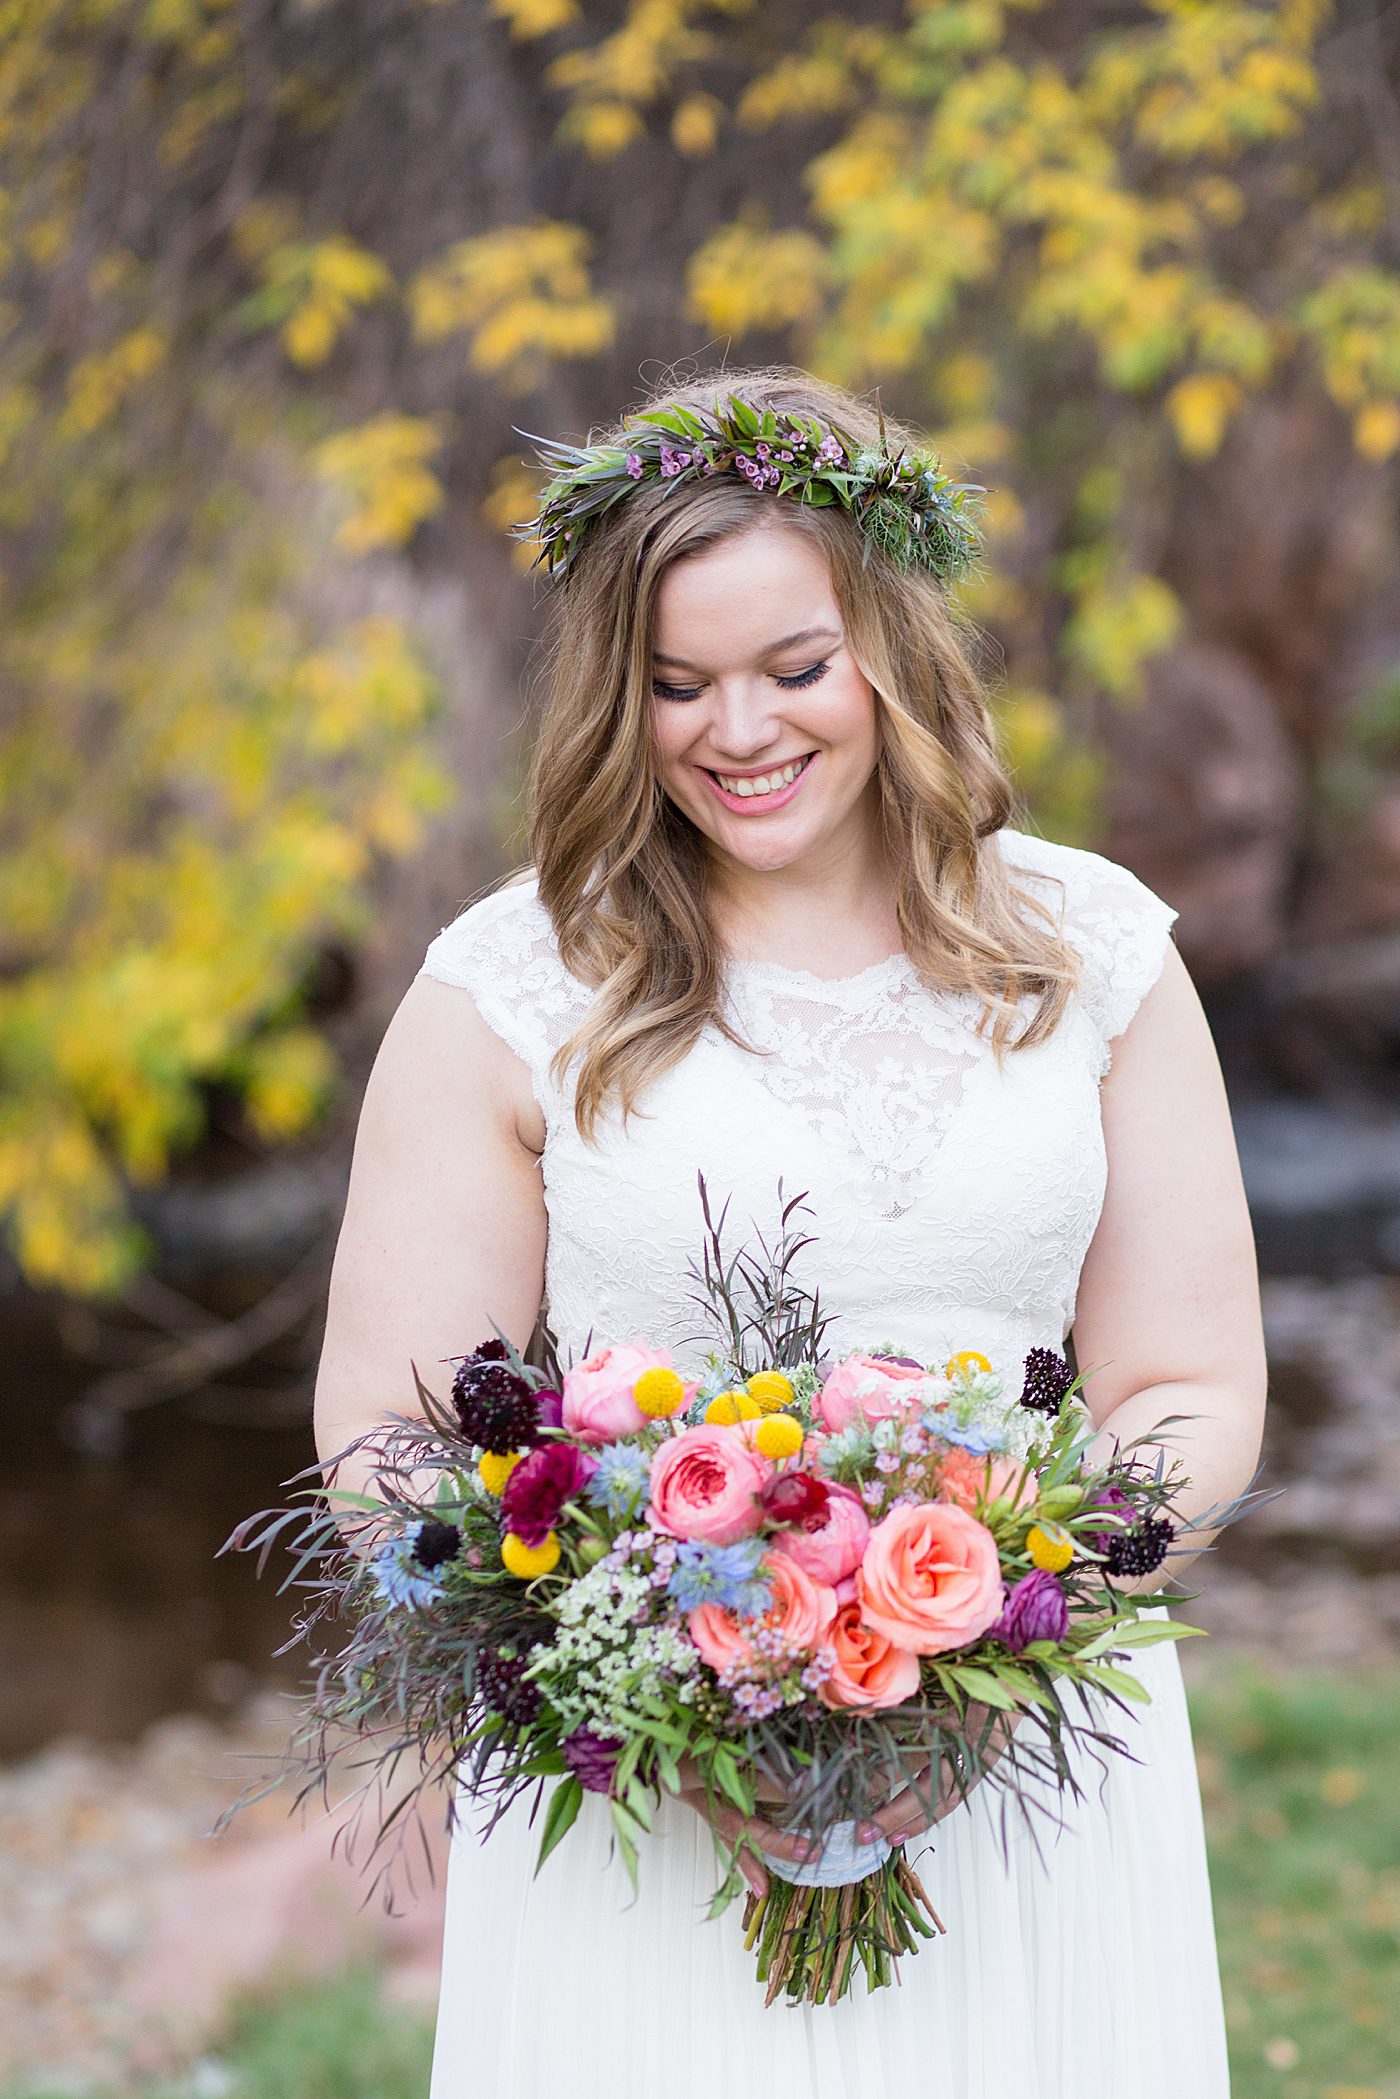 bride holding a colorful wedding bouquet